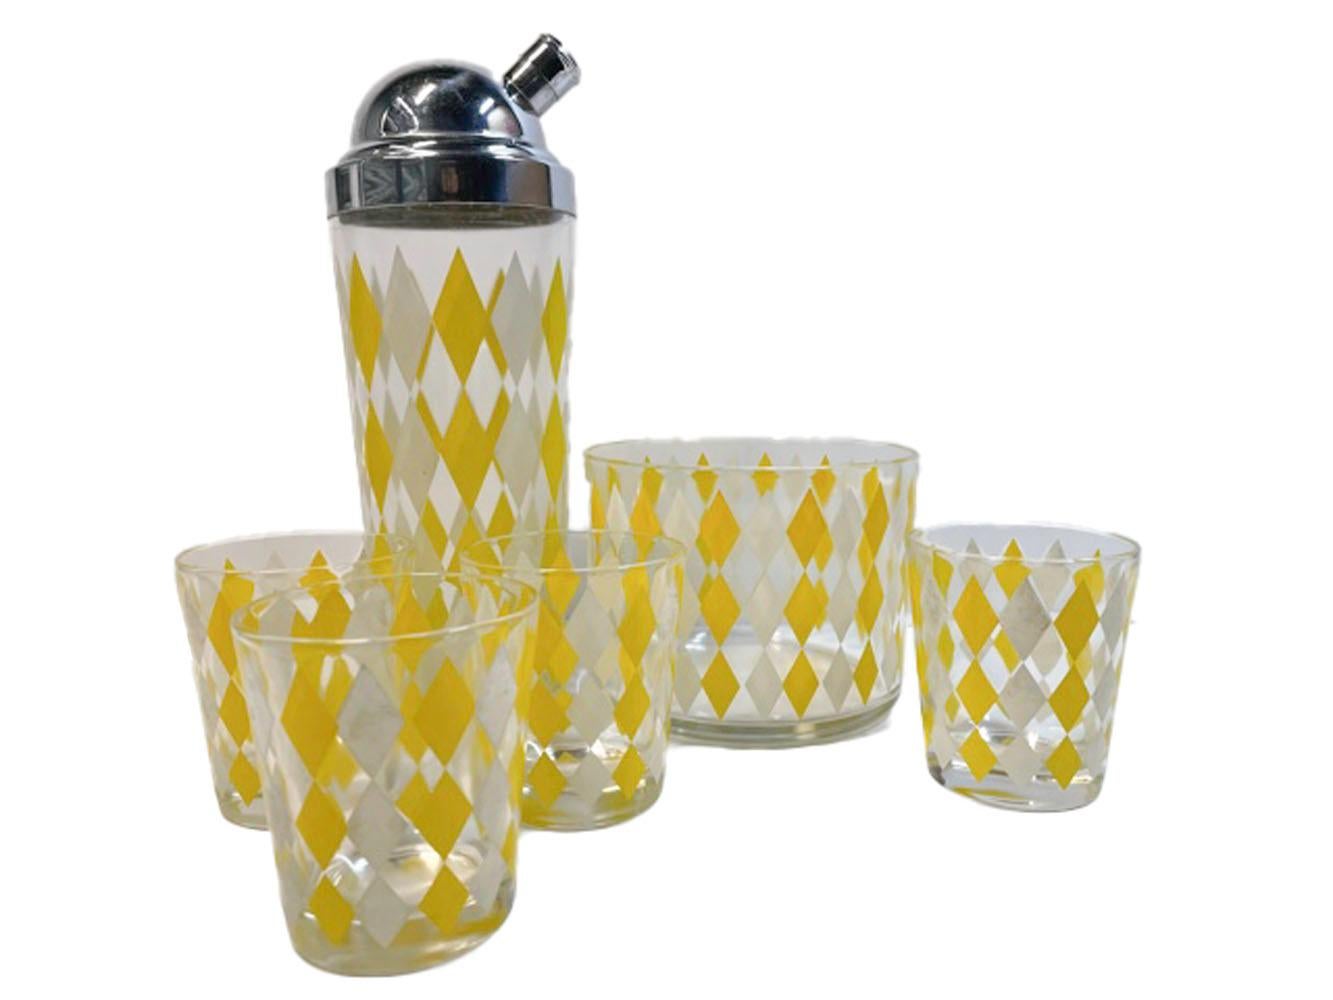 Mid-Century Modern cocktail set with alternating columns of yellow and white diamonds on clear glass.

1 - Cocktail shaker: 10